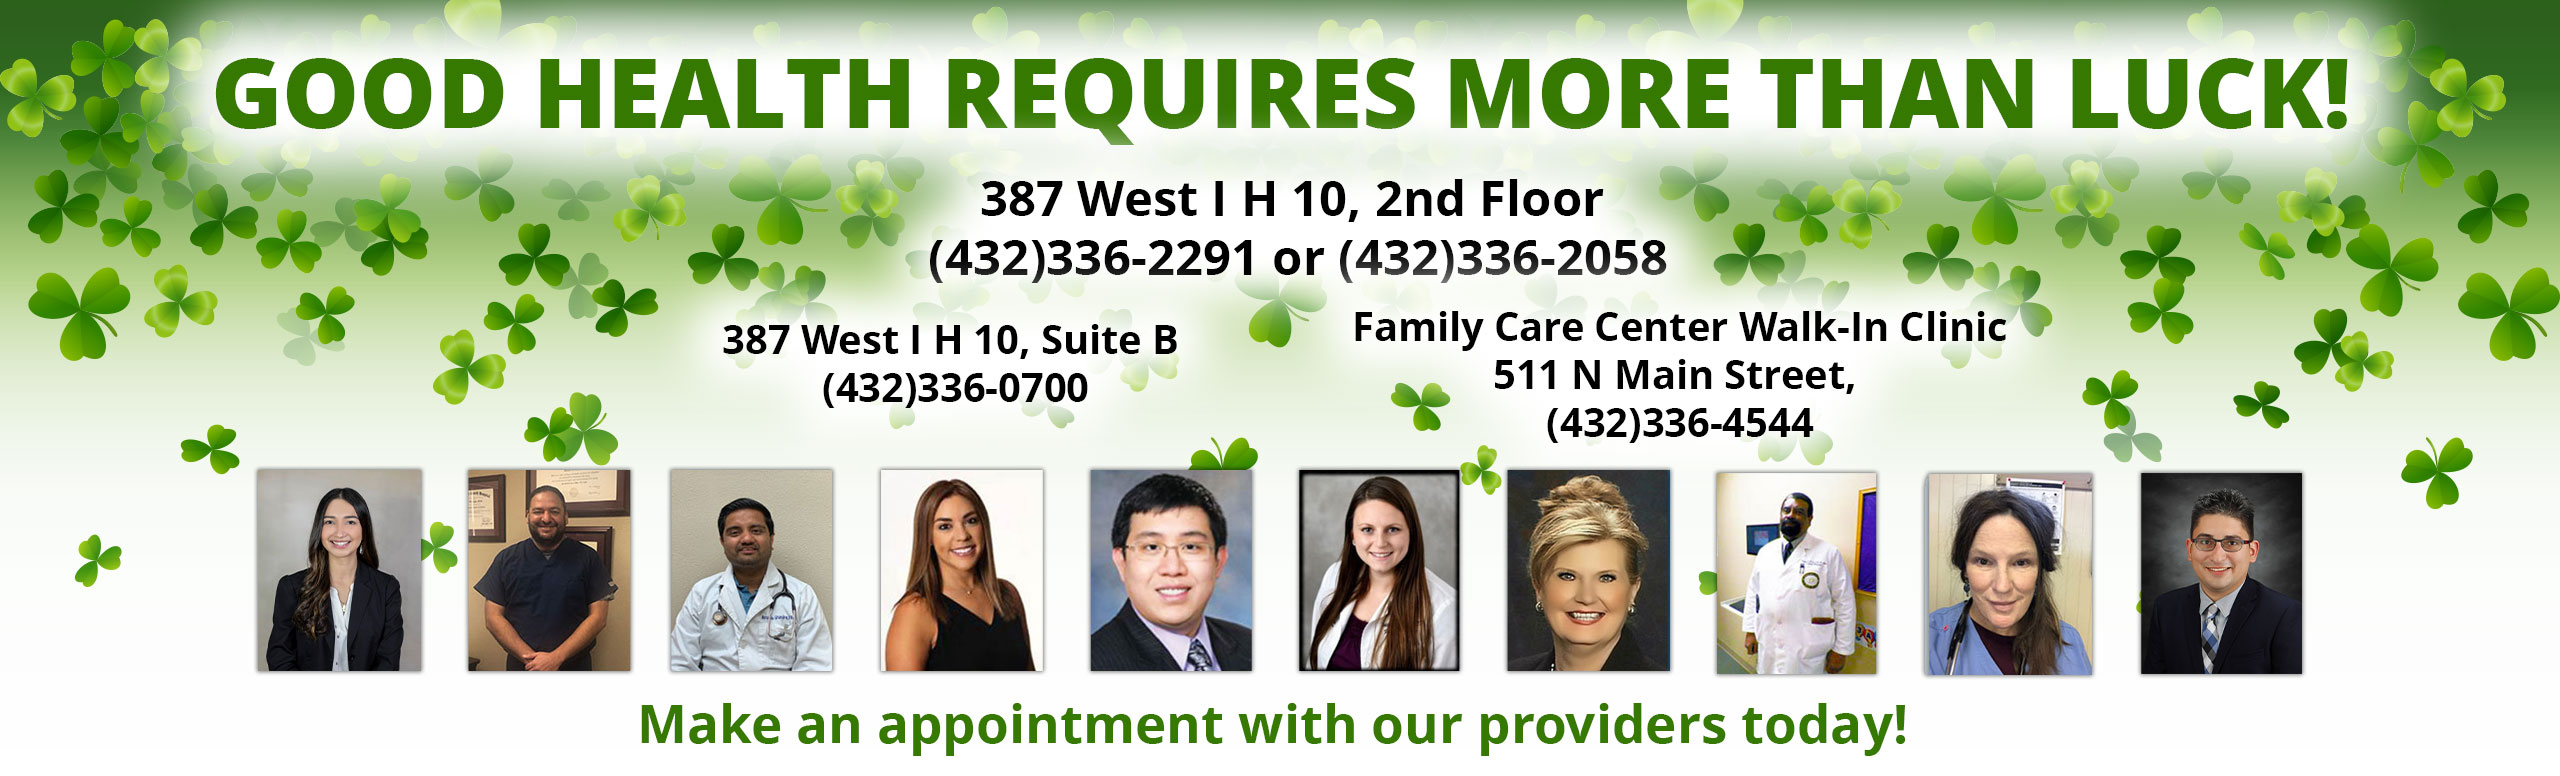 Banner picture of our Physicians. Banner says:
Your Health Can't Wait
387 West I H 10, 2nd Floor Fort Stockton, Texas 79735

 Office Phone Number (432)336-2291 Phone Number (432)336-2058

 

387 West I H 10, Suite B Fort Stockton, Texas 79735 Office Phone Number (432)336-0700

 

Family Care Center Walk-In Clinic

511 N Main Street, Fort Stockton, Texas 79735

Office Phone Number (432)336-4544